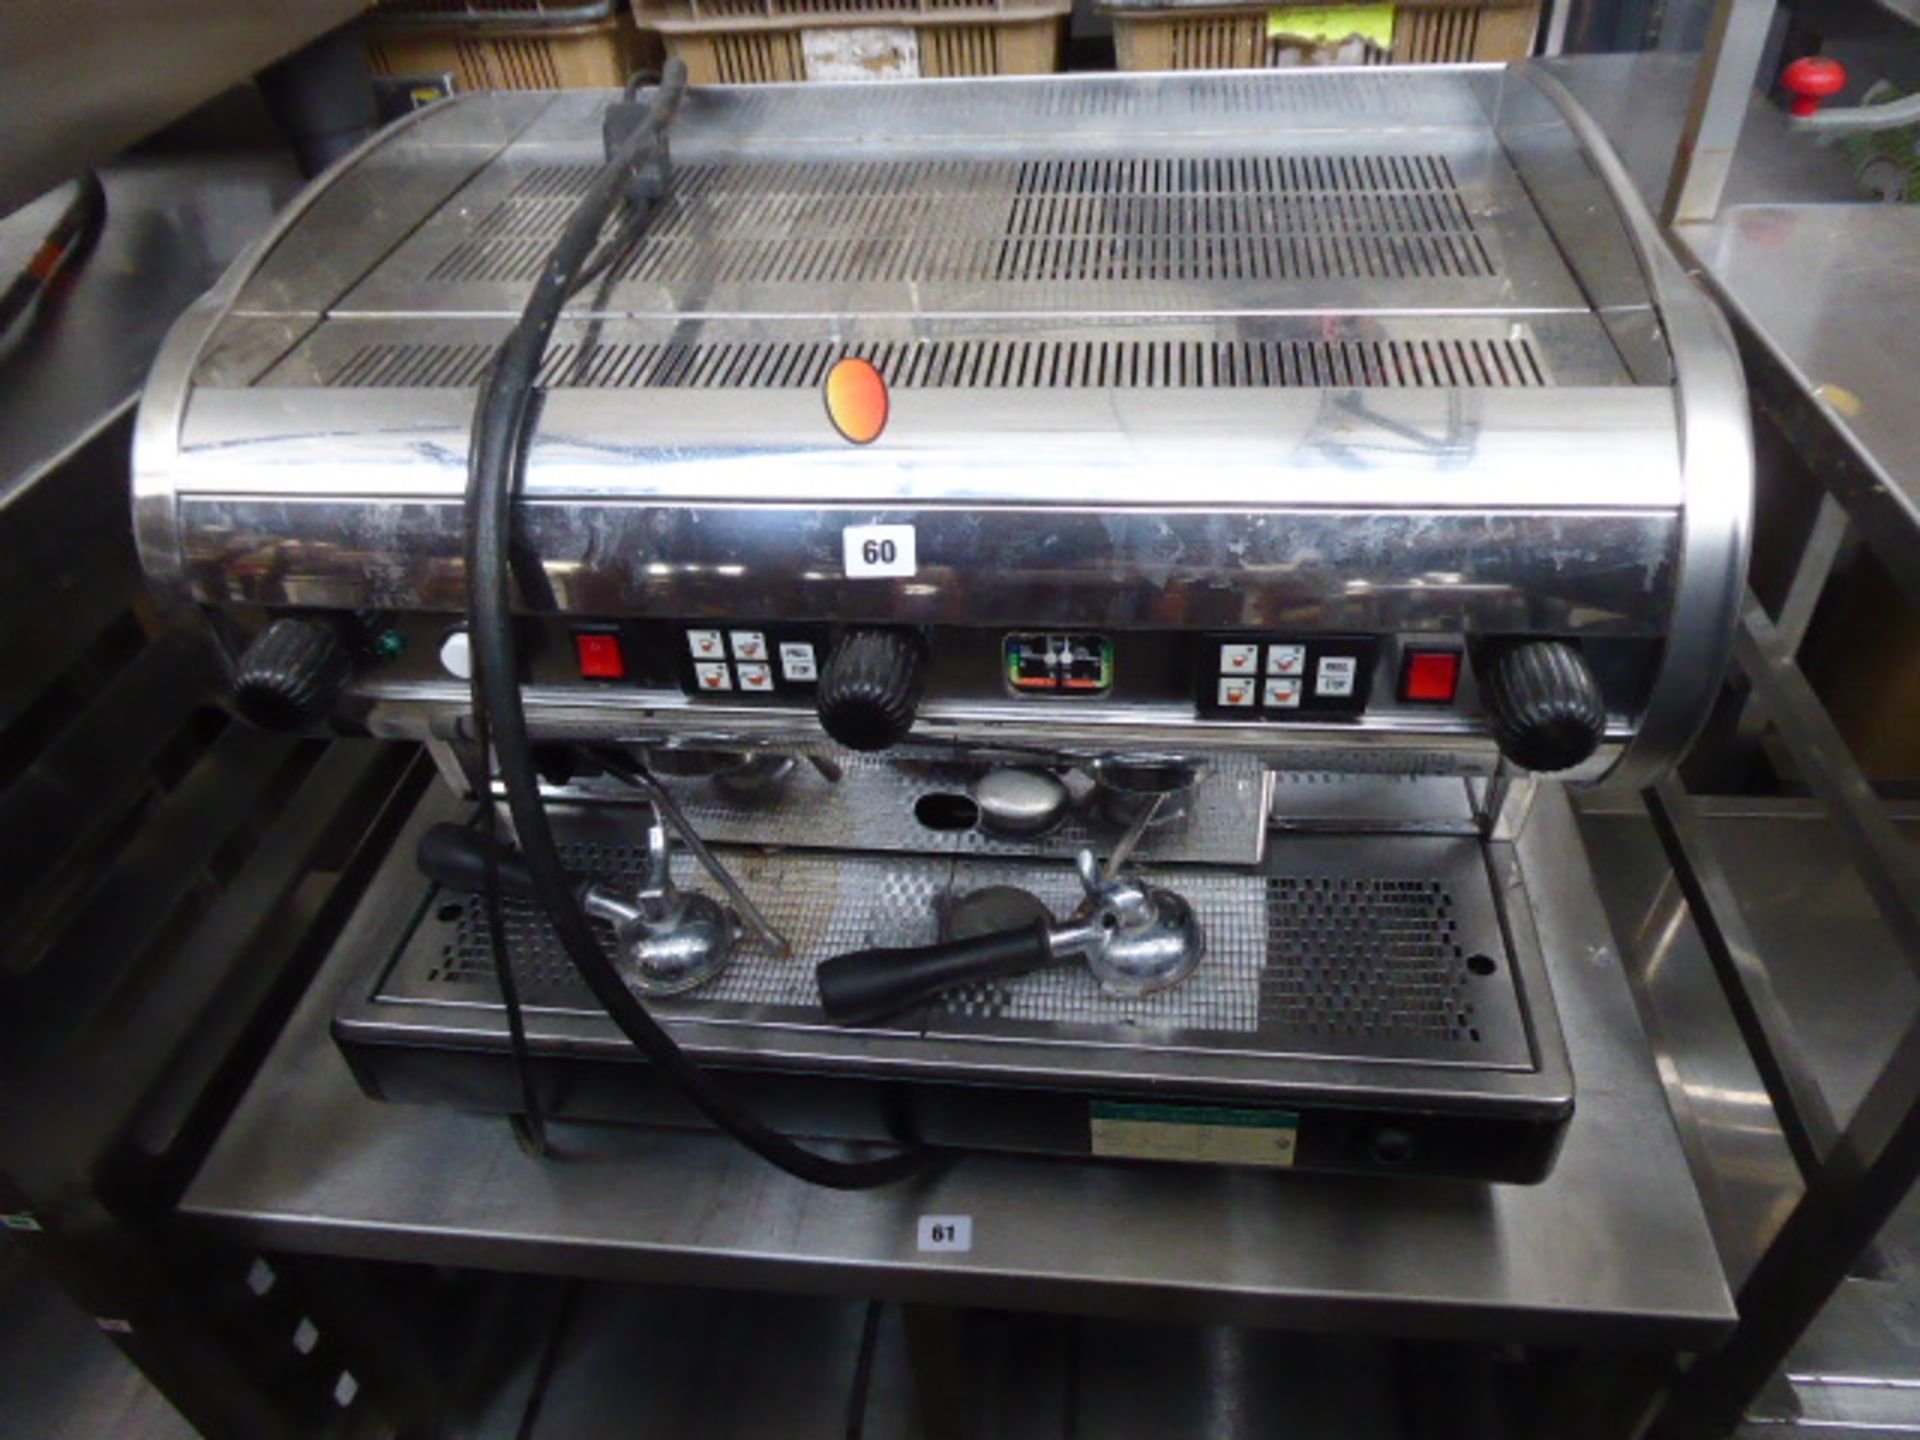 70cm Lisa SME/2 barista type automatic 2 station coffee machine with 2 group heads - Image 2 of 2